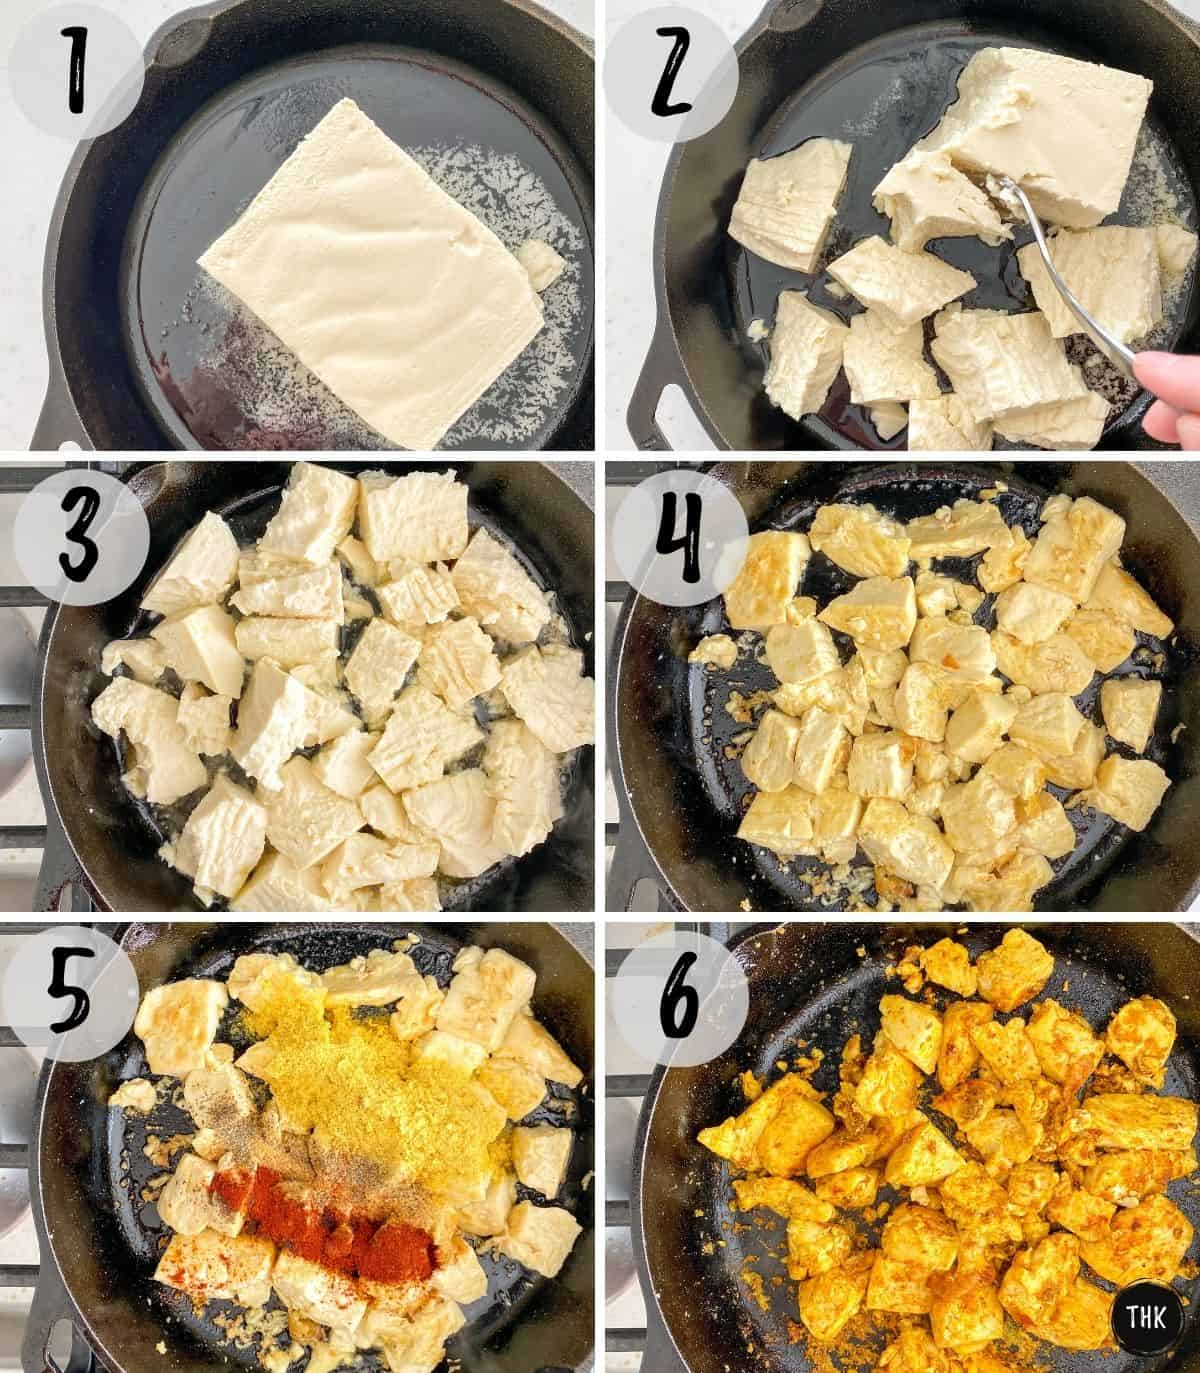 Process shots of block of tofu in cast iron pan being cut into smaller pieces and cooked.